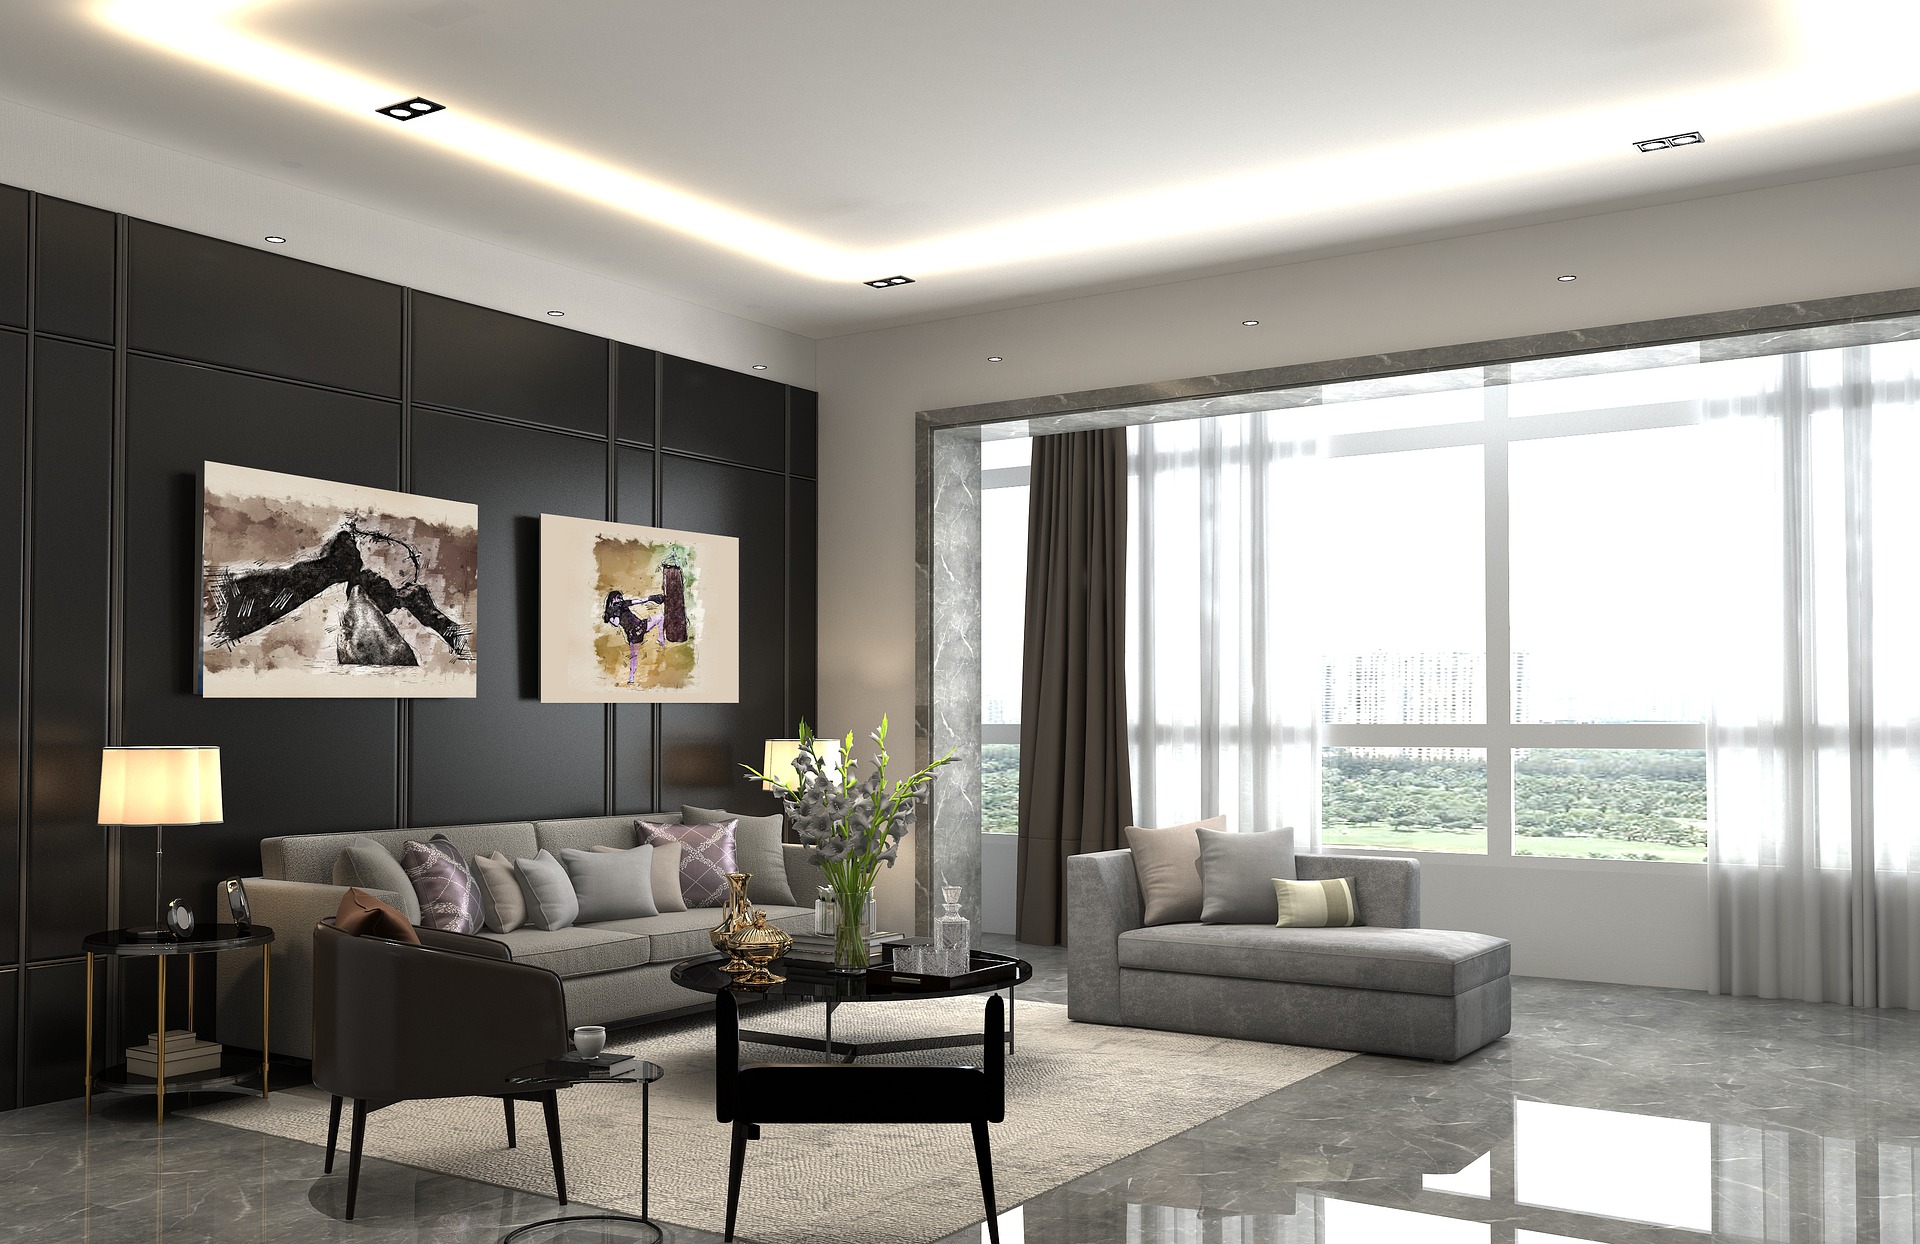 Your luxury interiors will be carefully maintained with the Letting Genie concierge service